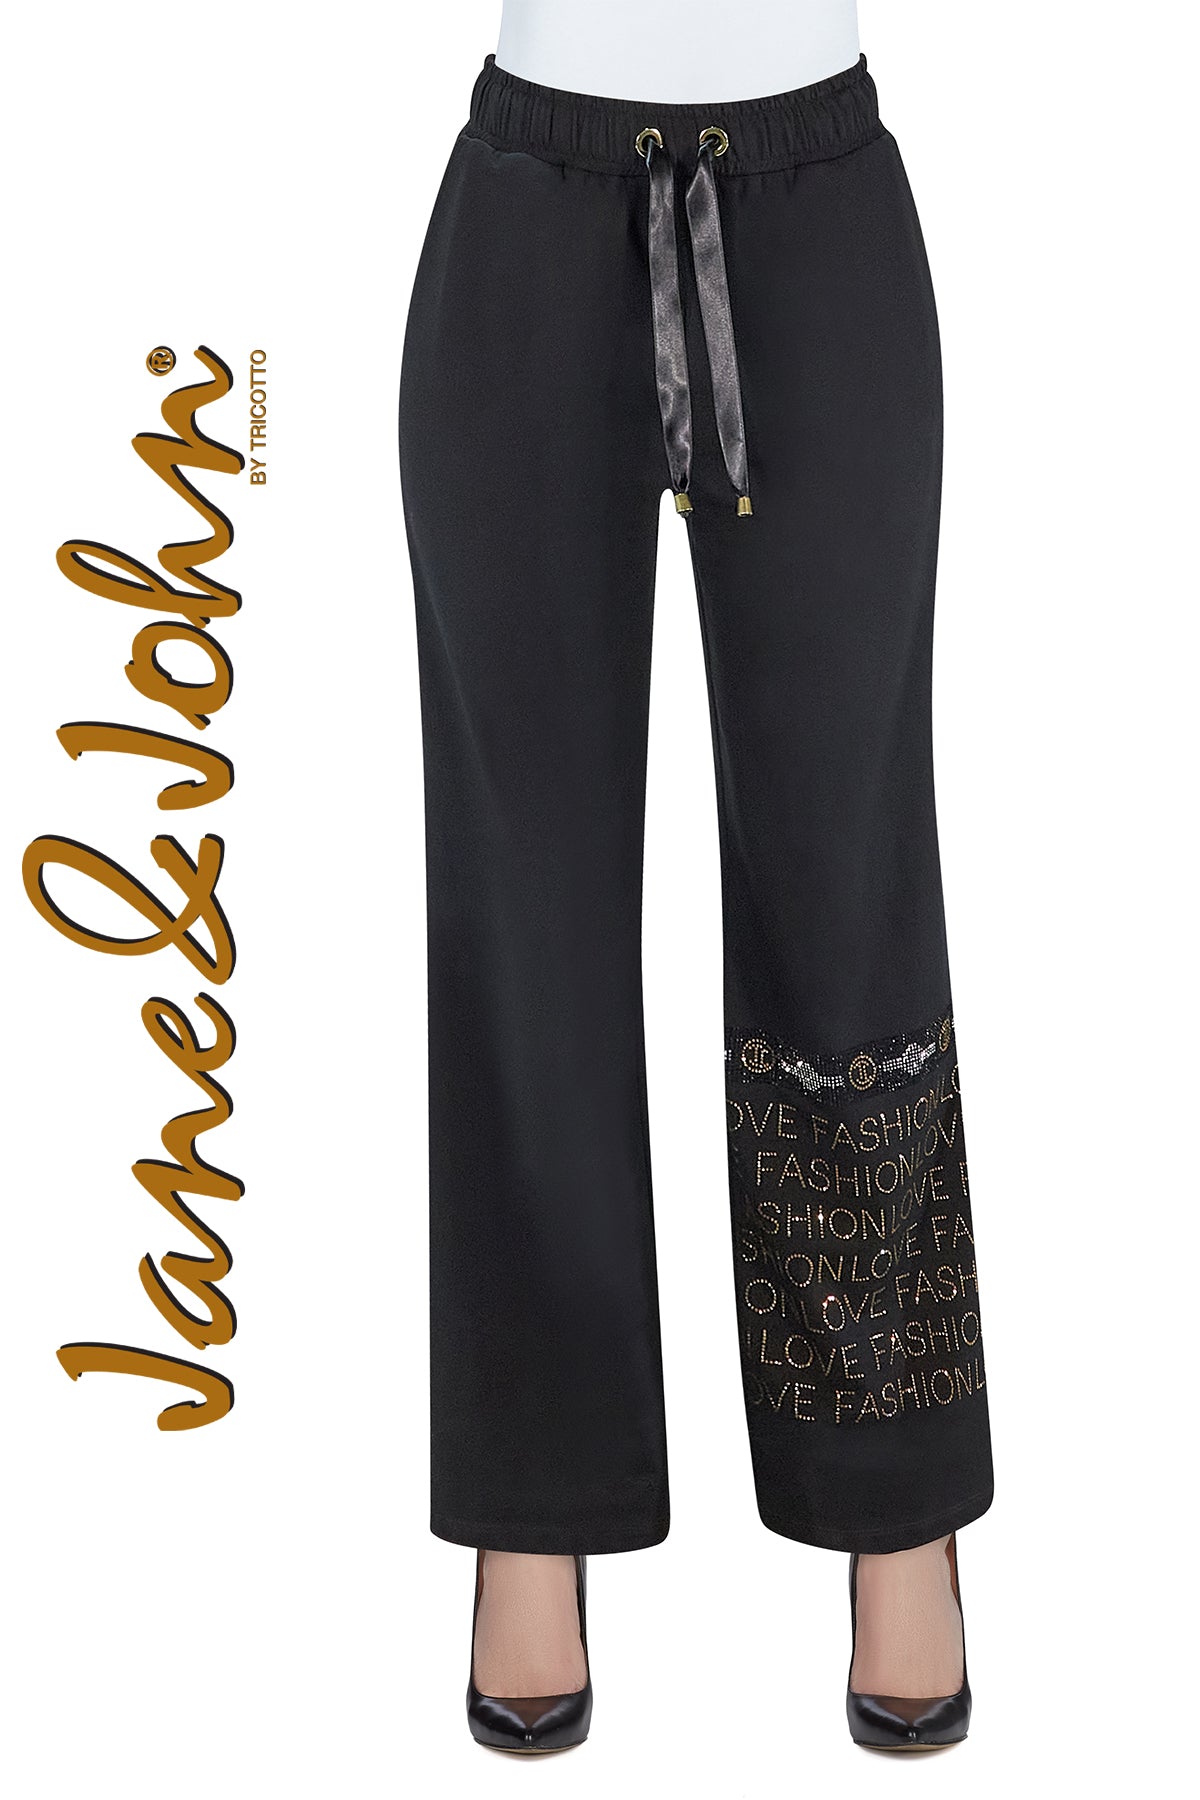 Jane & John Relaxed Knit Pant With Silver Gold Sequin Fashion Print Detail On Front